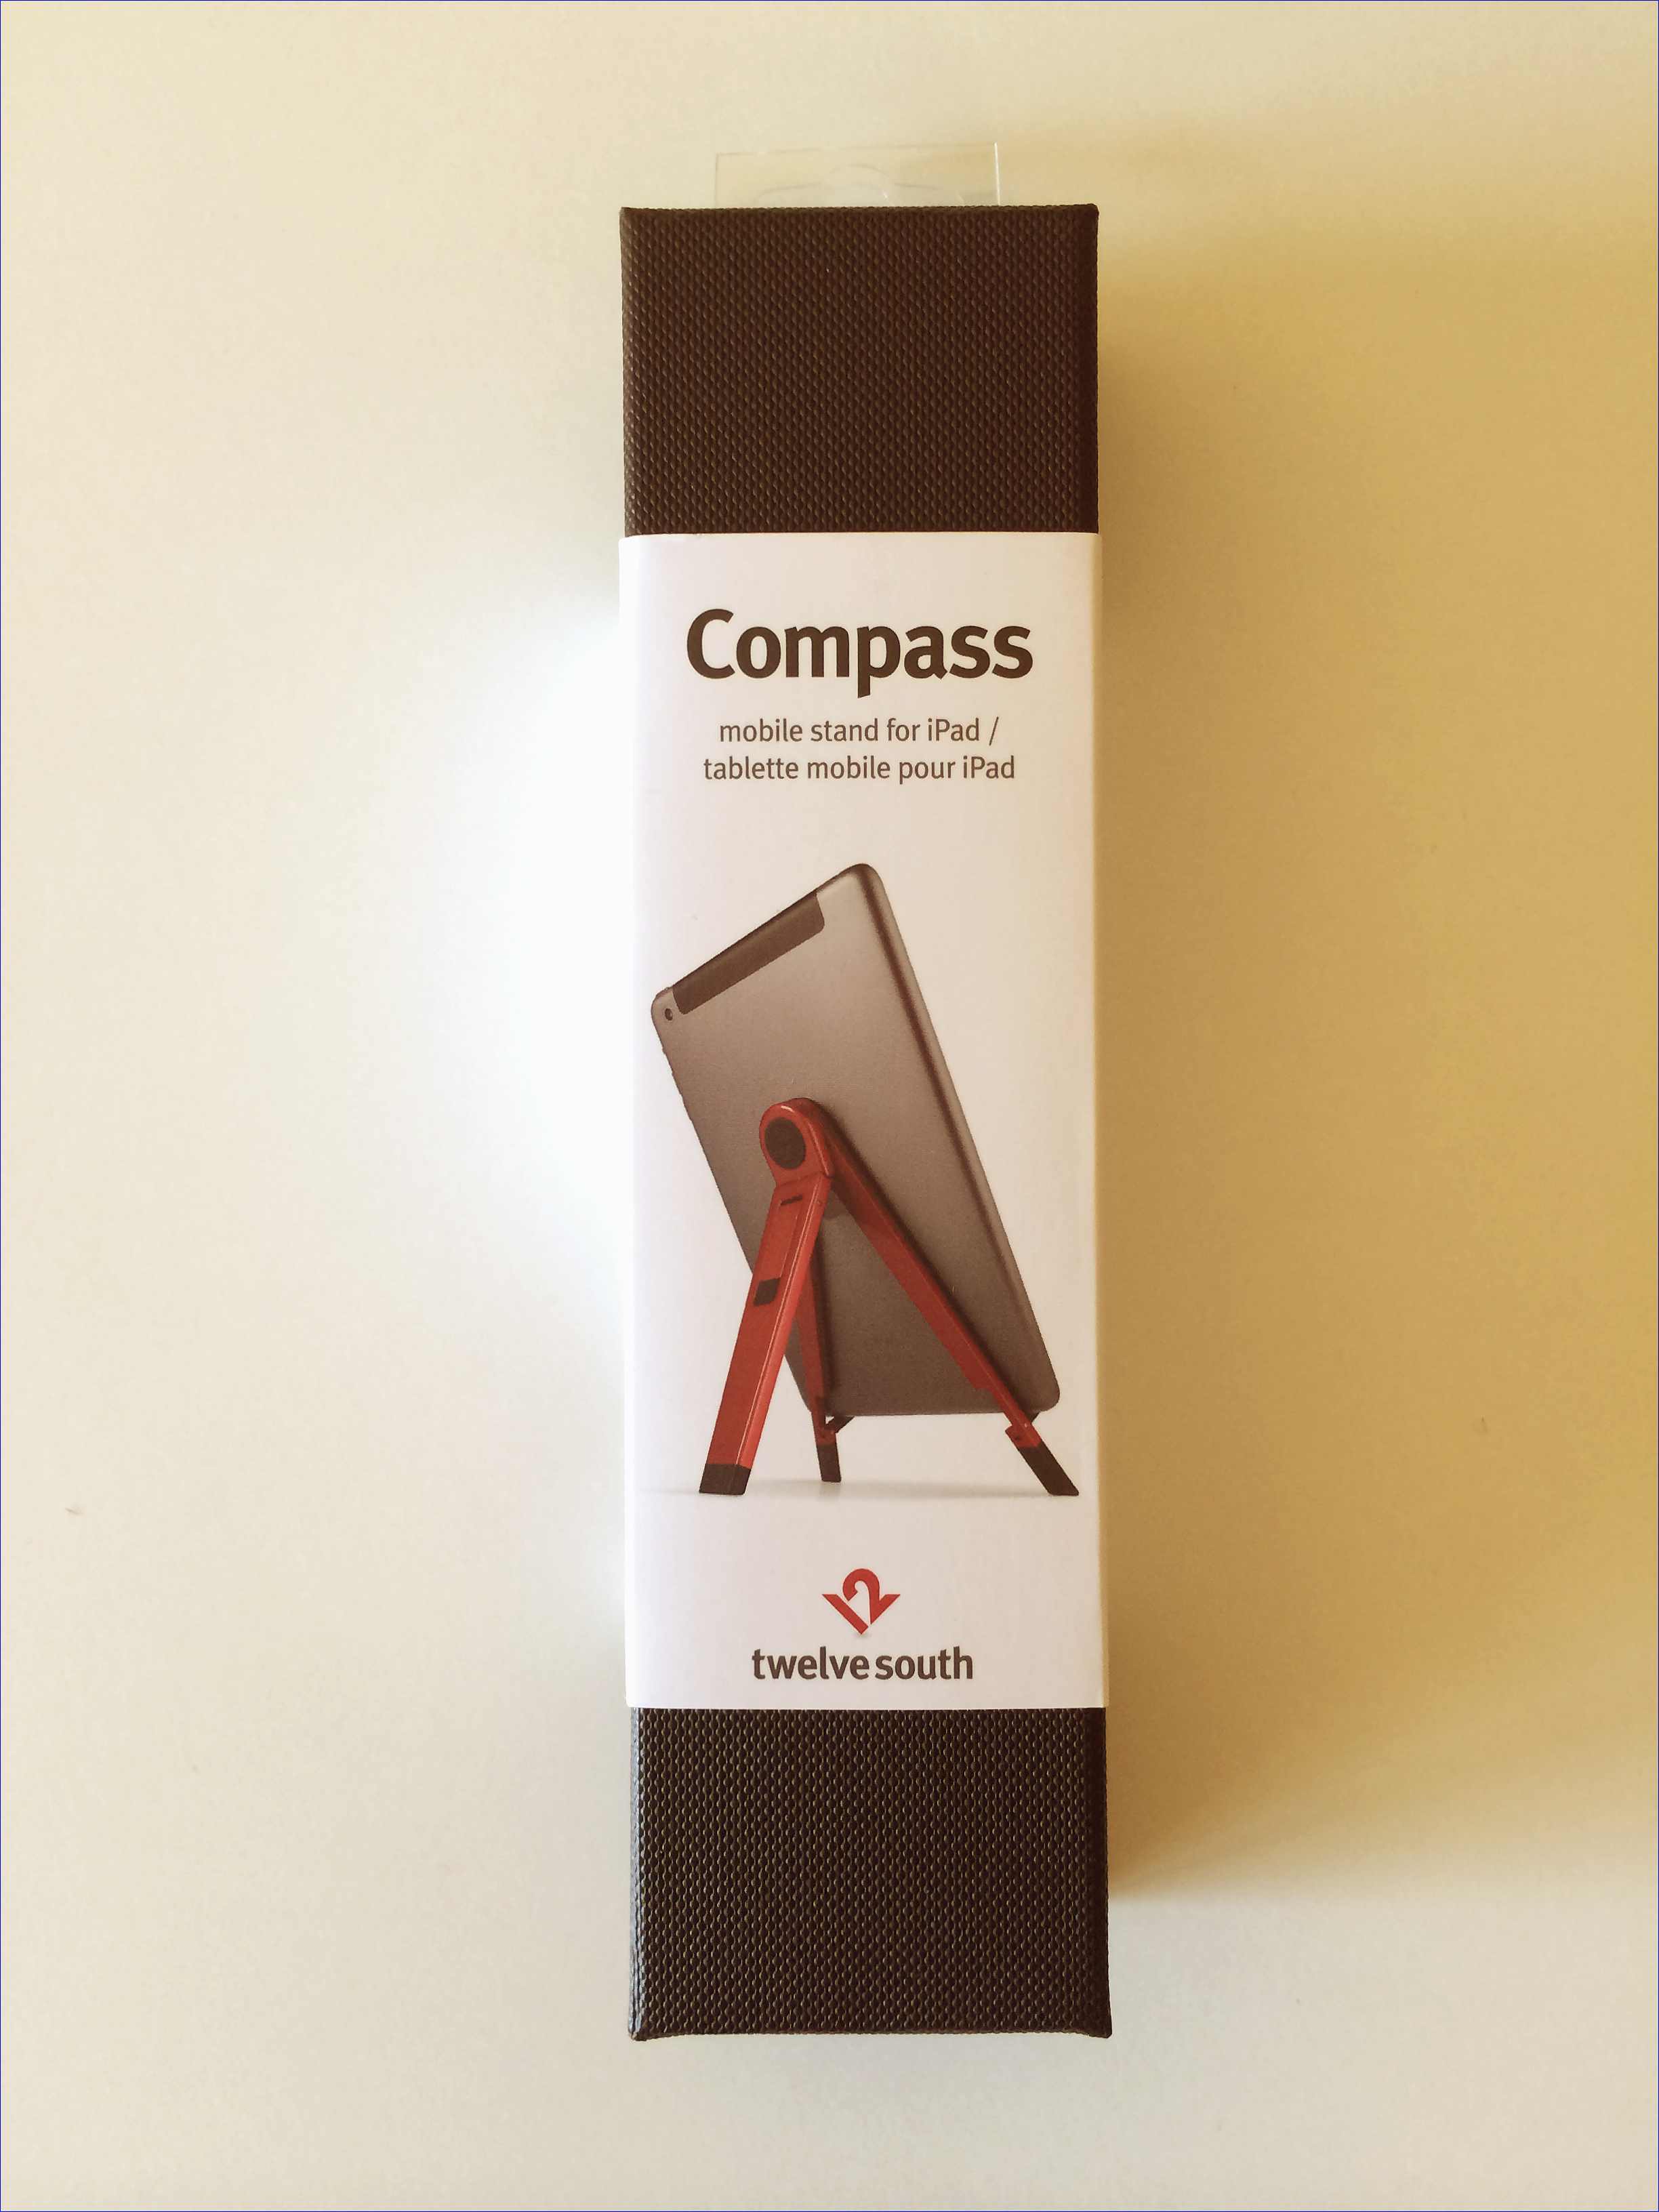 Twelve South Compass 2 for iPad (image 003)